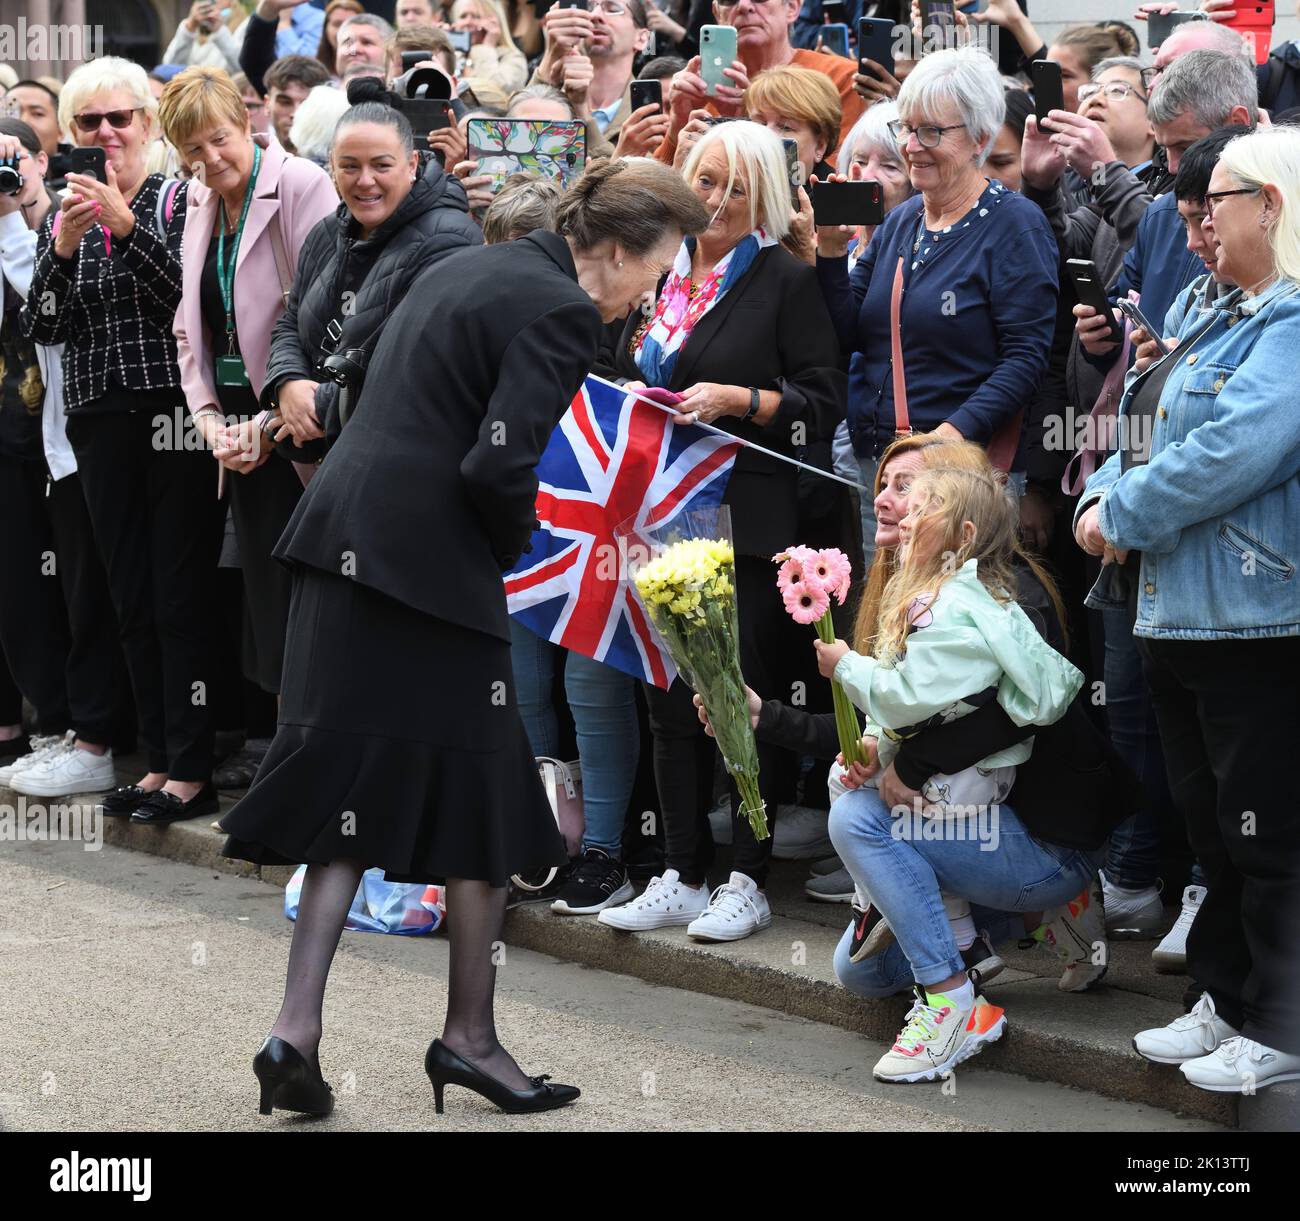 Glasgow, Scotland, UK. 15th, September, 2022. Glasgow Scotland, UK. The Princess Royal, Princess Anne visits Glasgow and meets the people before entering the city chambers to meet the Lord Provost, and invited guests of organisations for whom Queen Elizabeth was patron. Credit. Douglas Carr/Alamy Live News Stock Photo